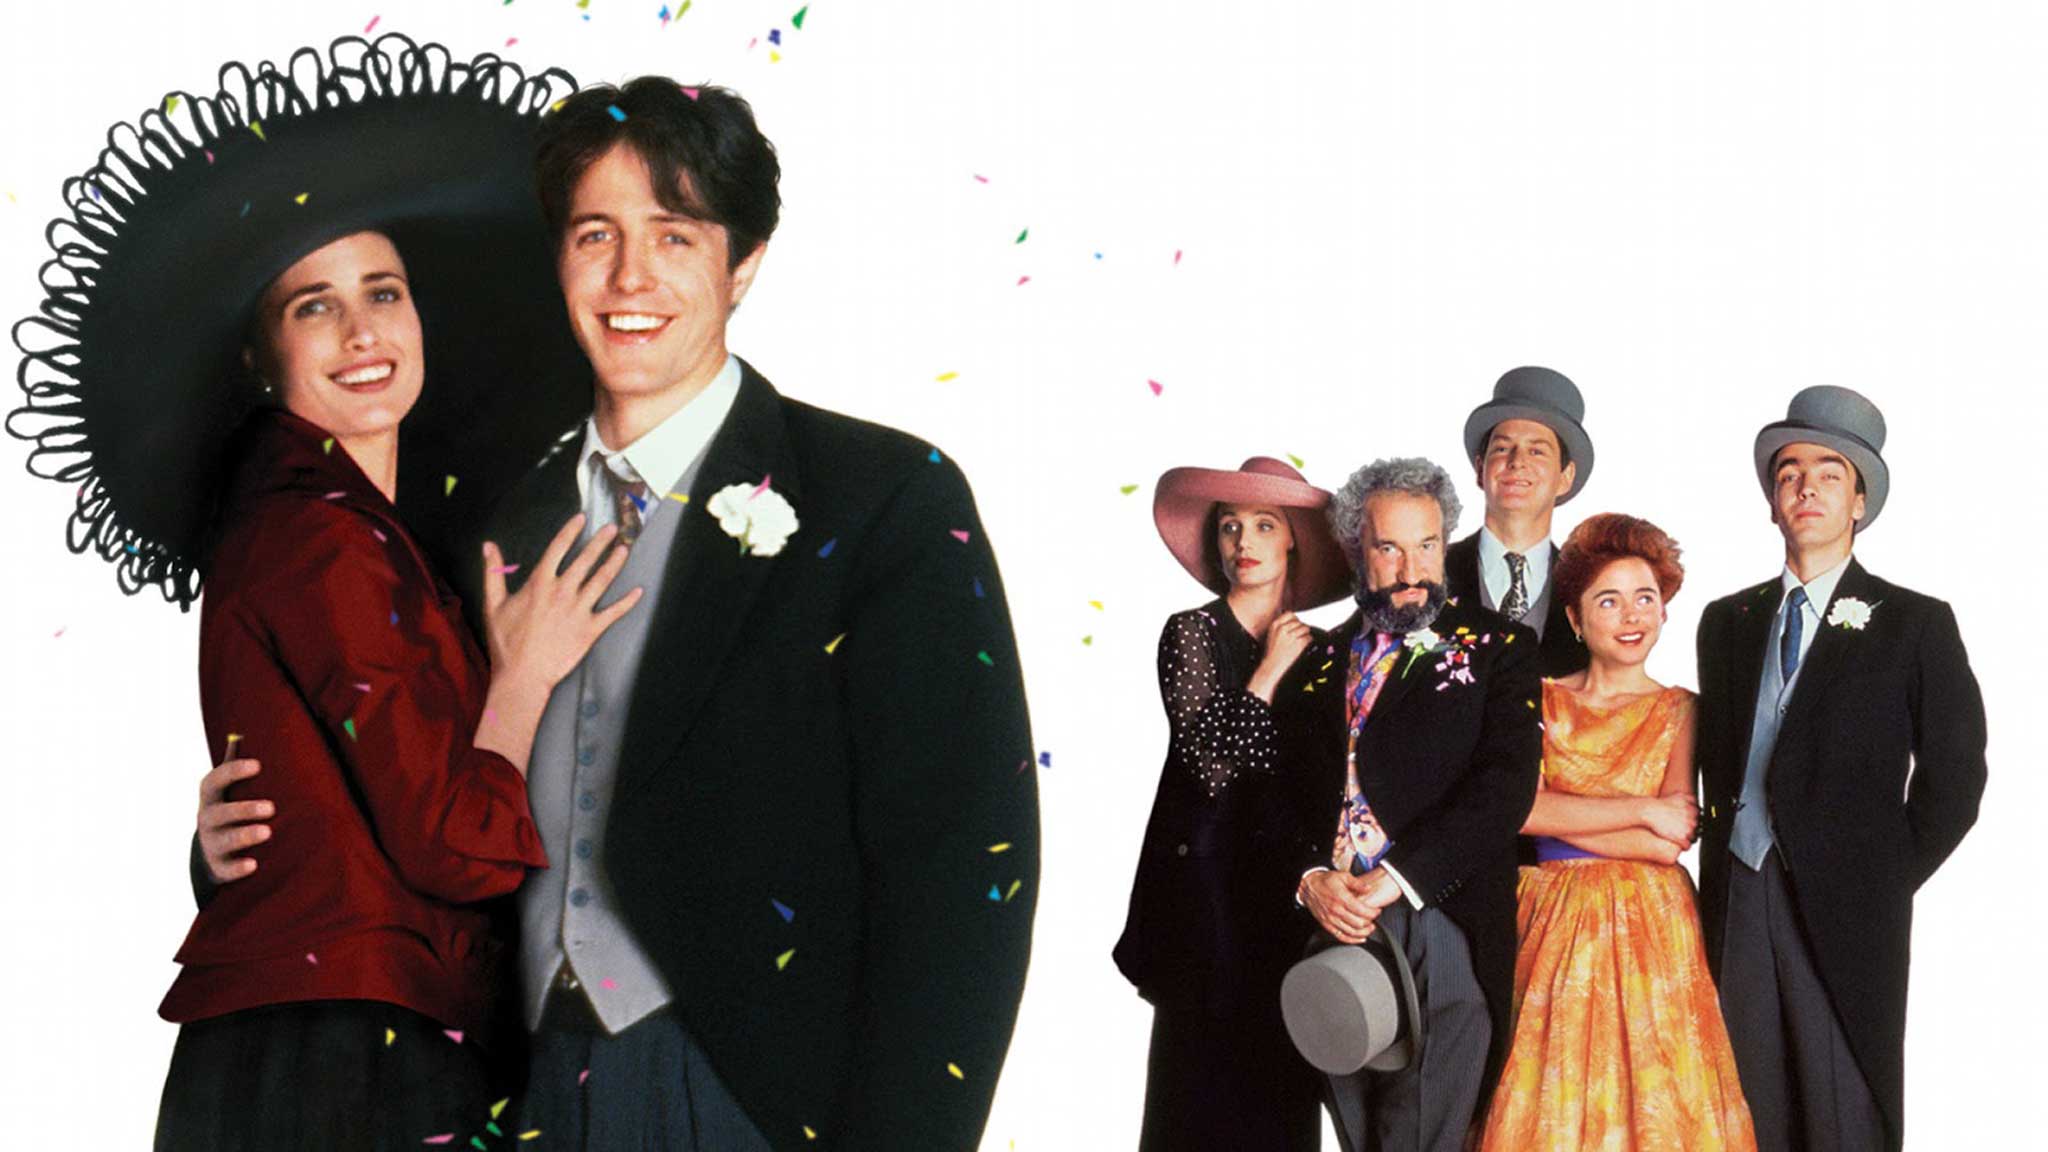 Four weddings and a funeral free online movie